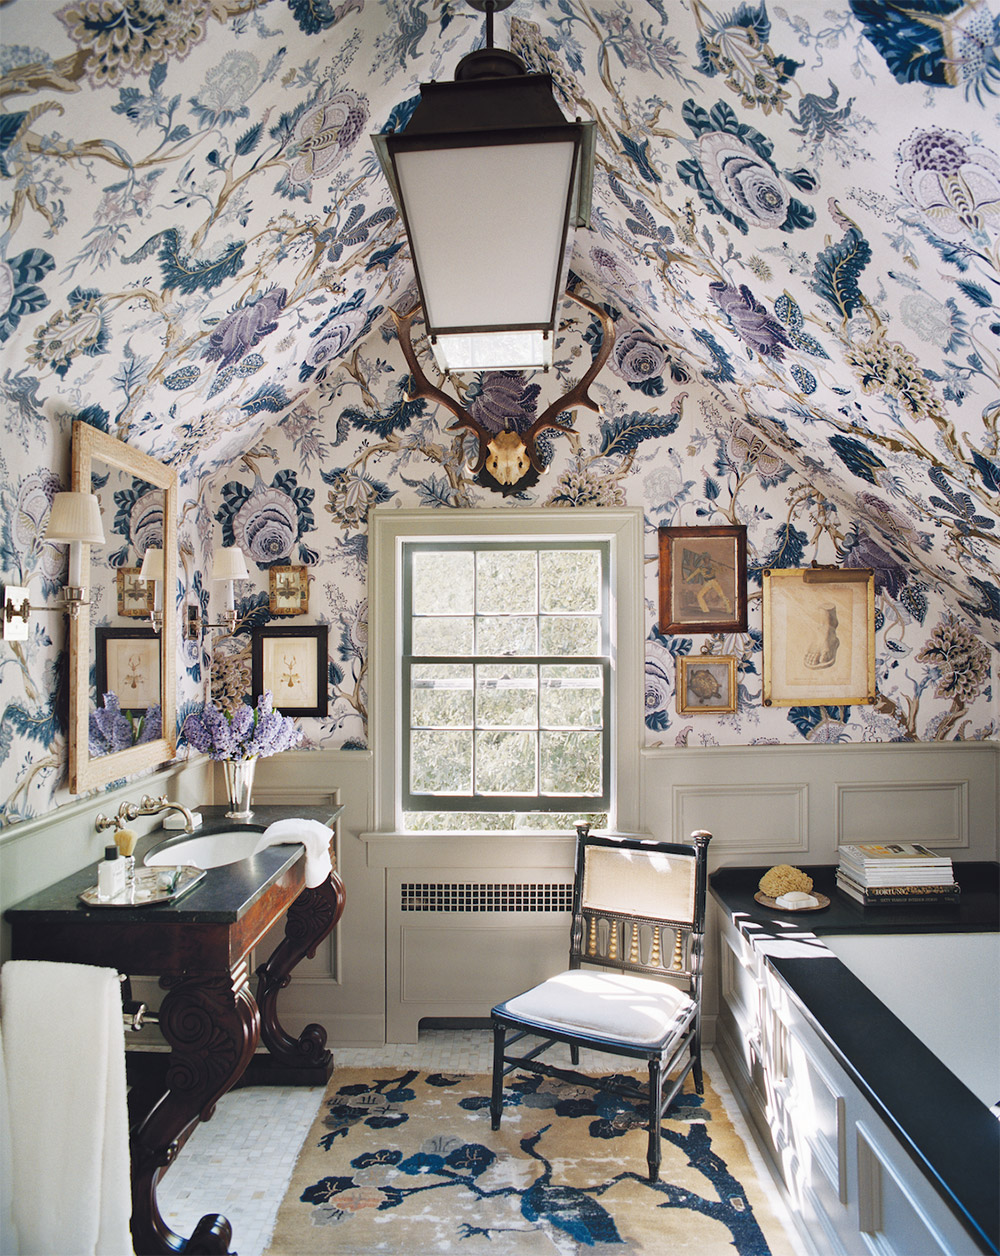 Bathroom With Paper-Backed Fabric Wallcoverings and Ceiling